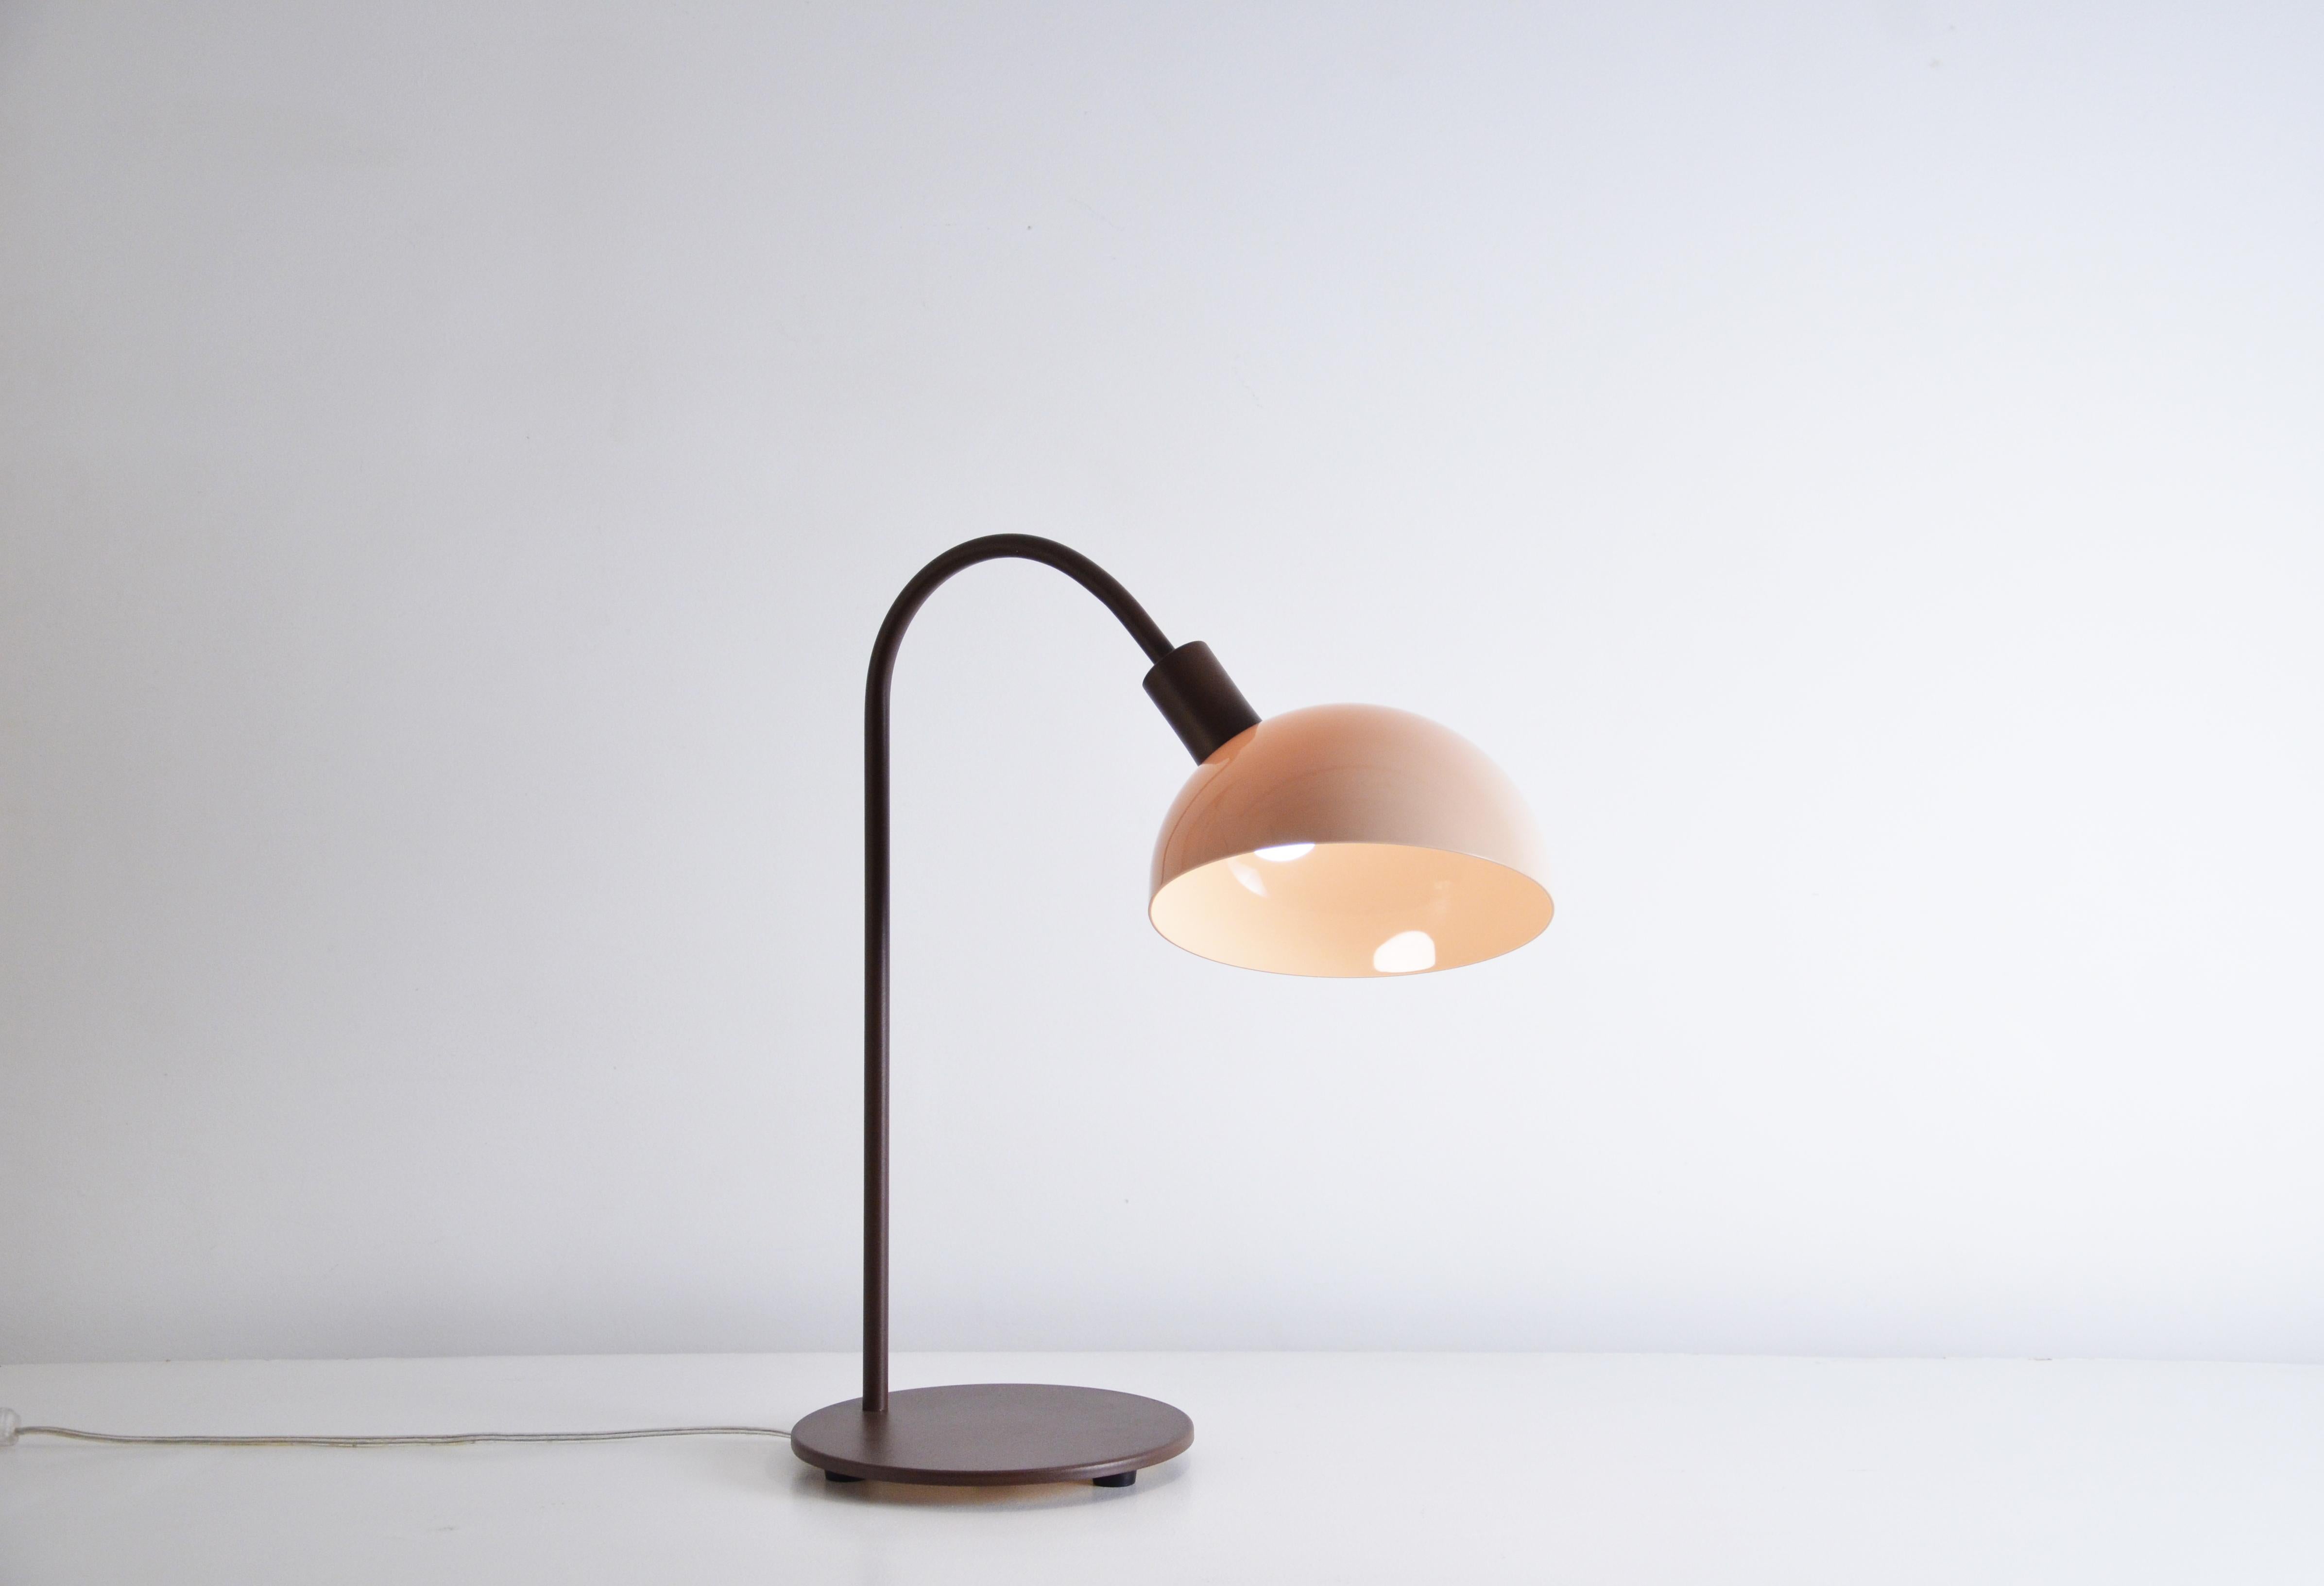 This table lamp is named Lichia. 
The product consists of a round acrylic diffuser and a steel base/structure.
The base is made of steel and it can be painted in white, black or brown. 
The diffuser is made of acrylic and can be in any of the colors